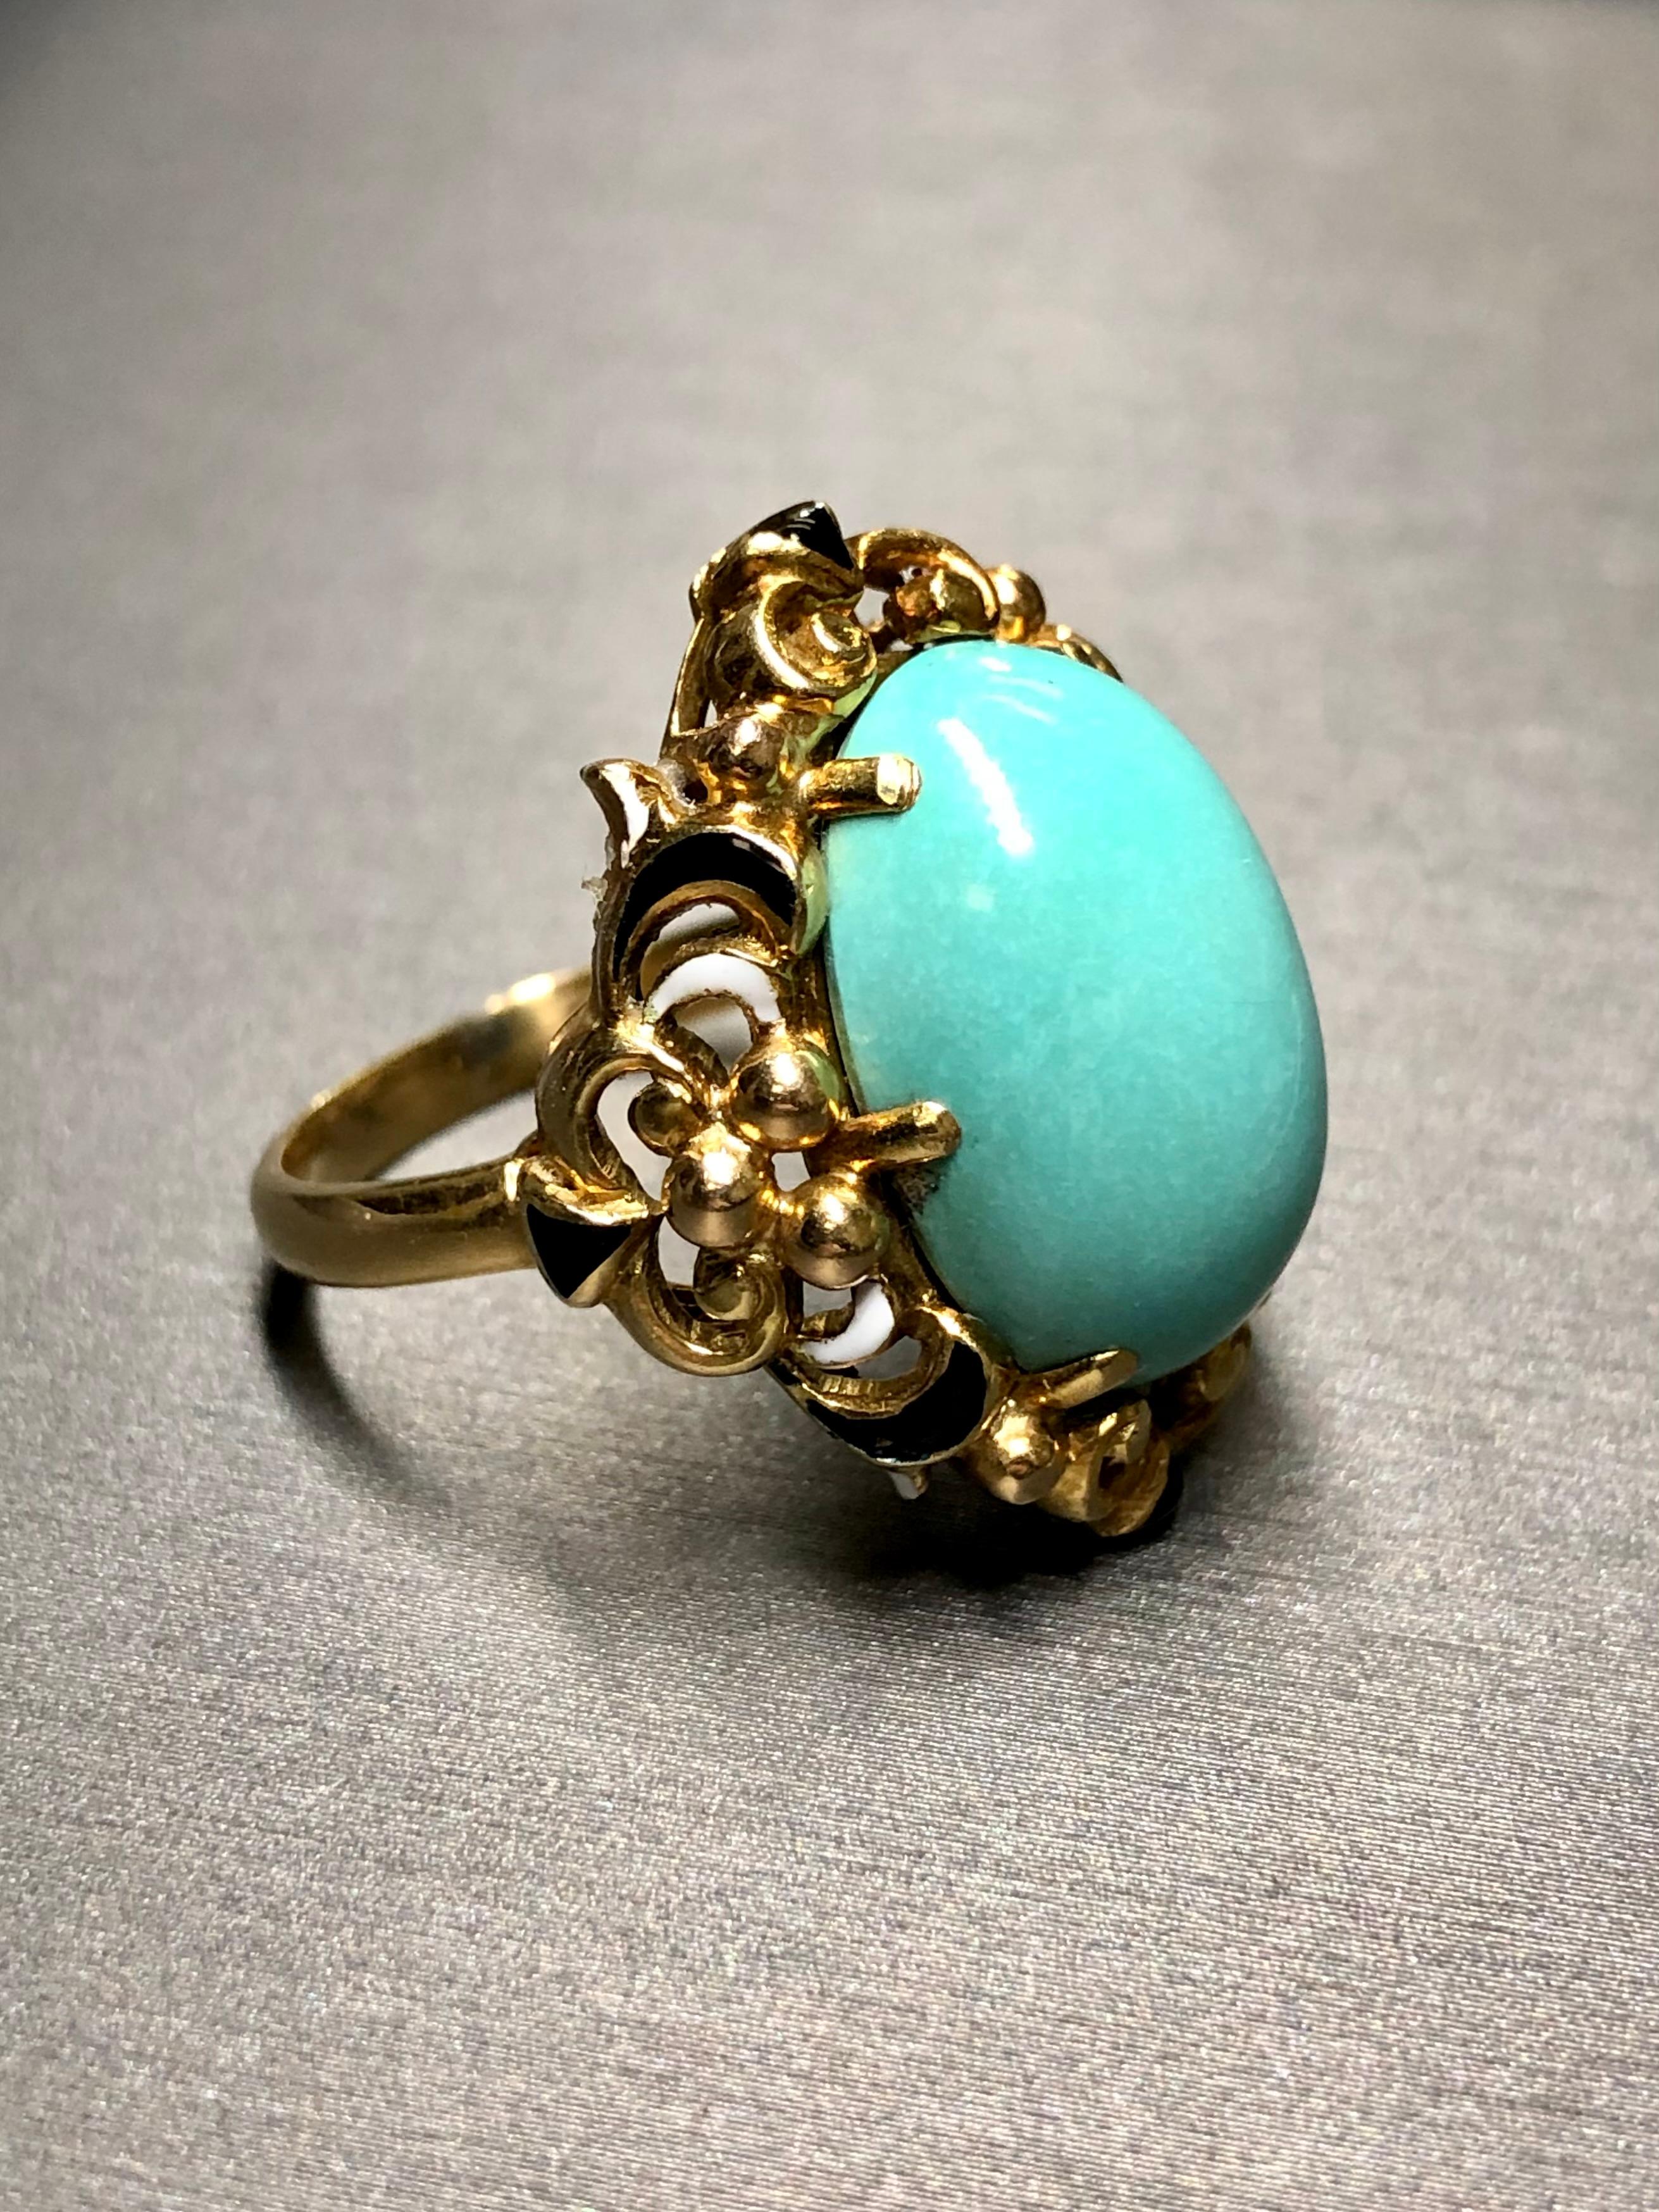 Vintage Retro 18K Cabochon Turquoise Enamel Cocktail Ring C. 1950’s In Good Condition For Sale In Winter Springs, FL